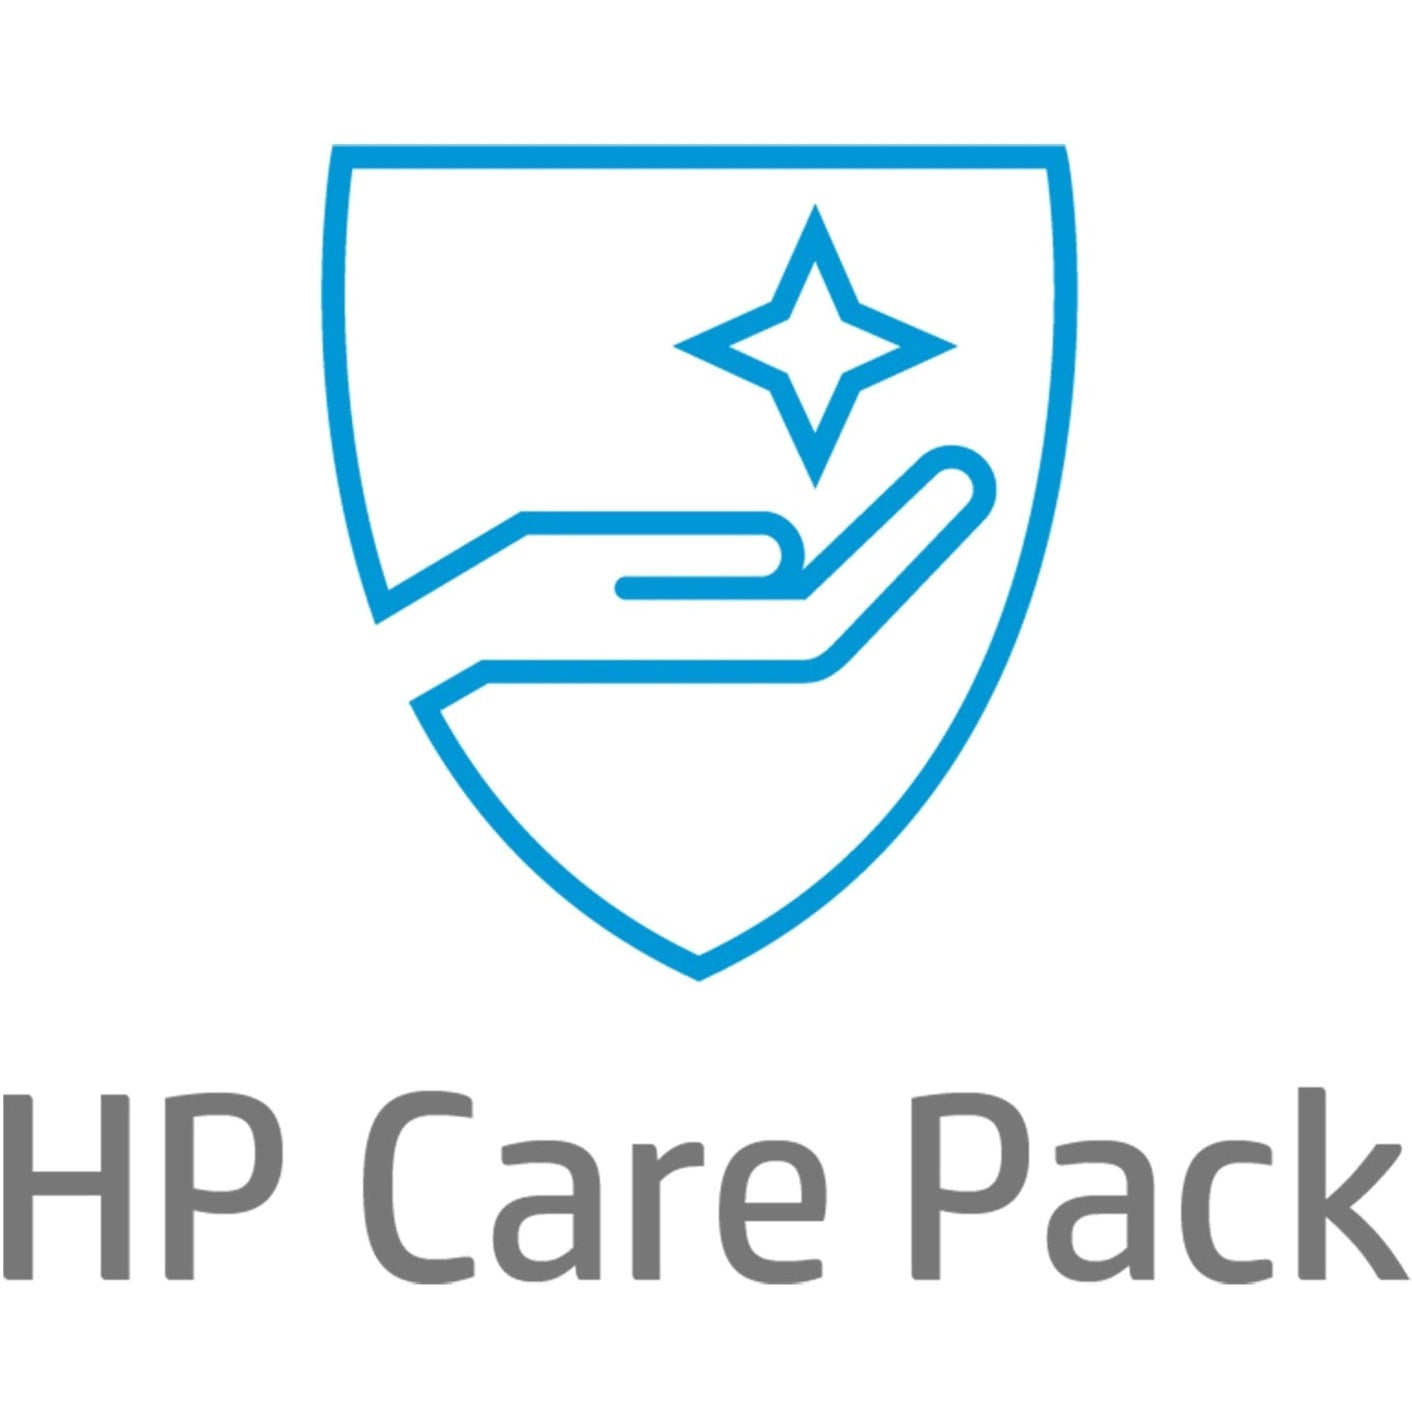 HP Care Pack - Extended Service - 5 Year - Service (U8LK8E)